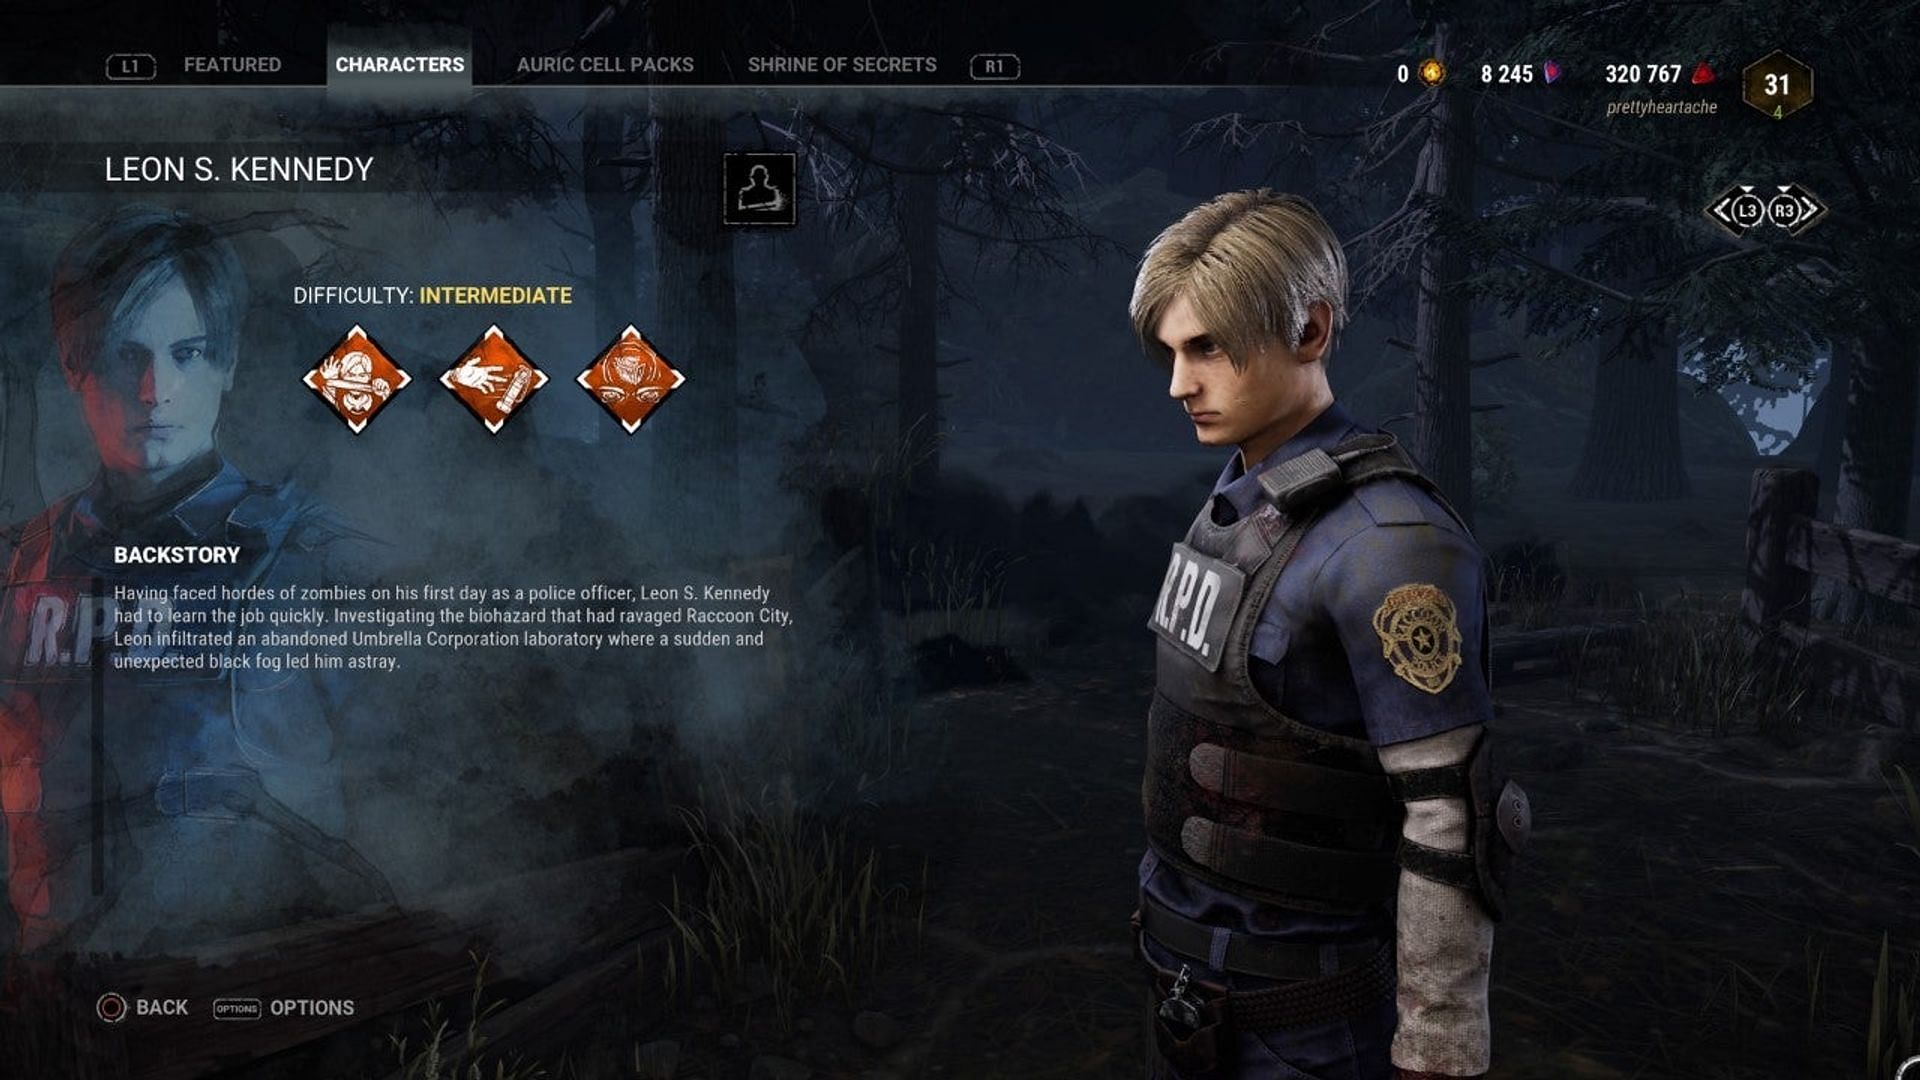 Leon Kennedy as he appears in Dead by Daylight (Image via Behaviour Interactive)